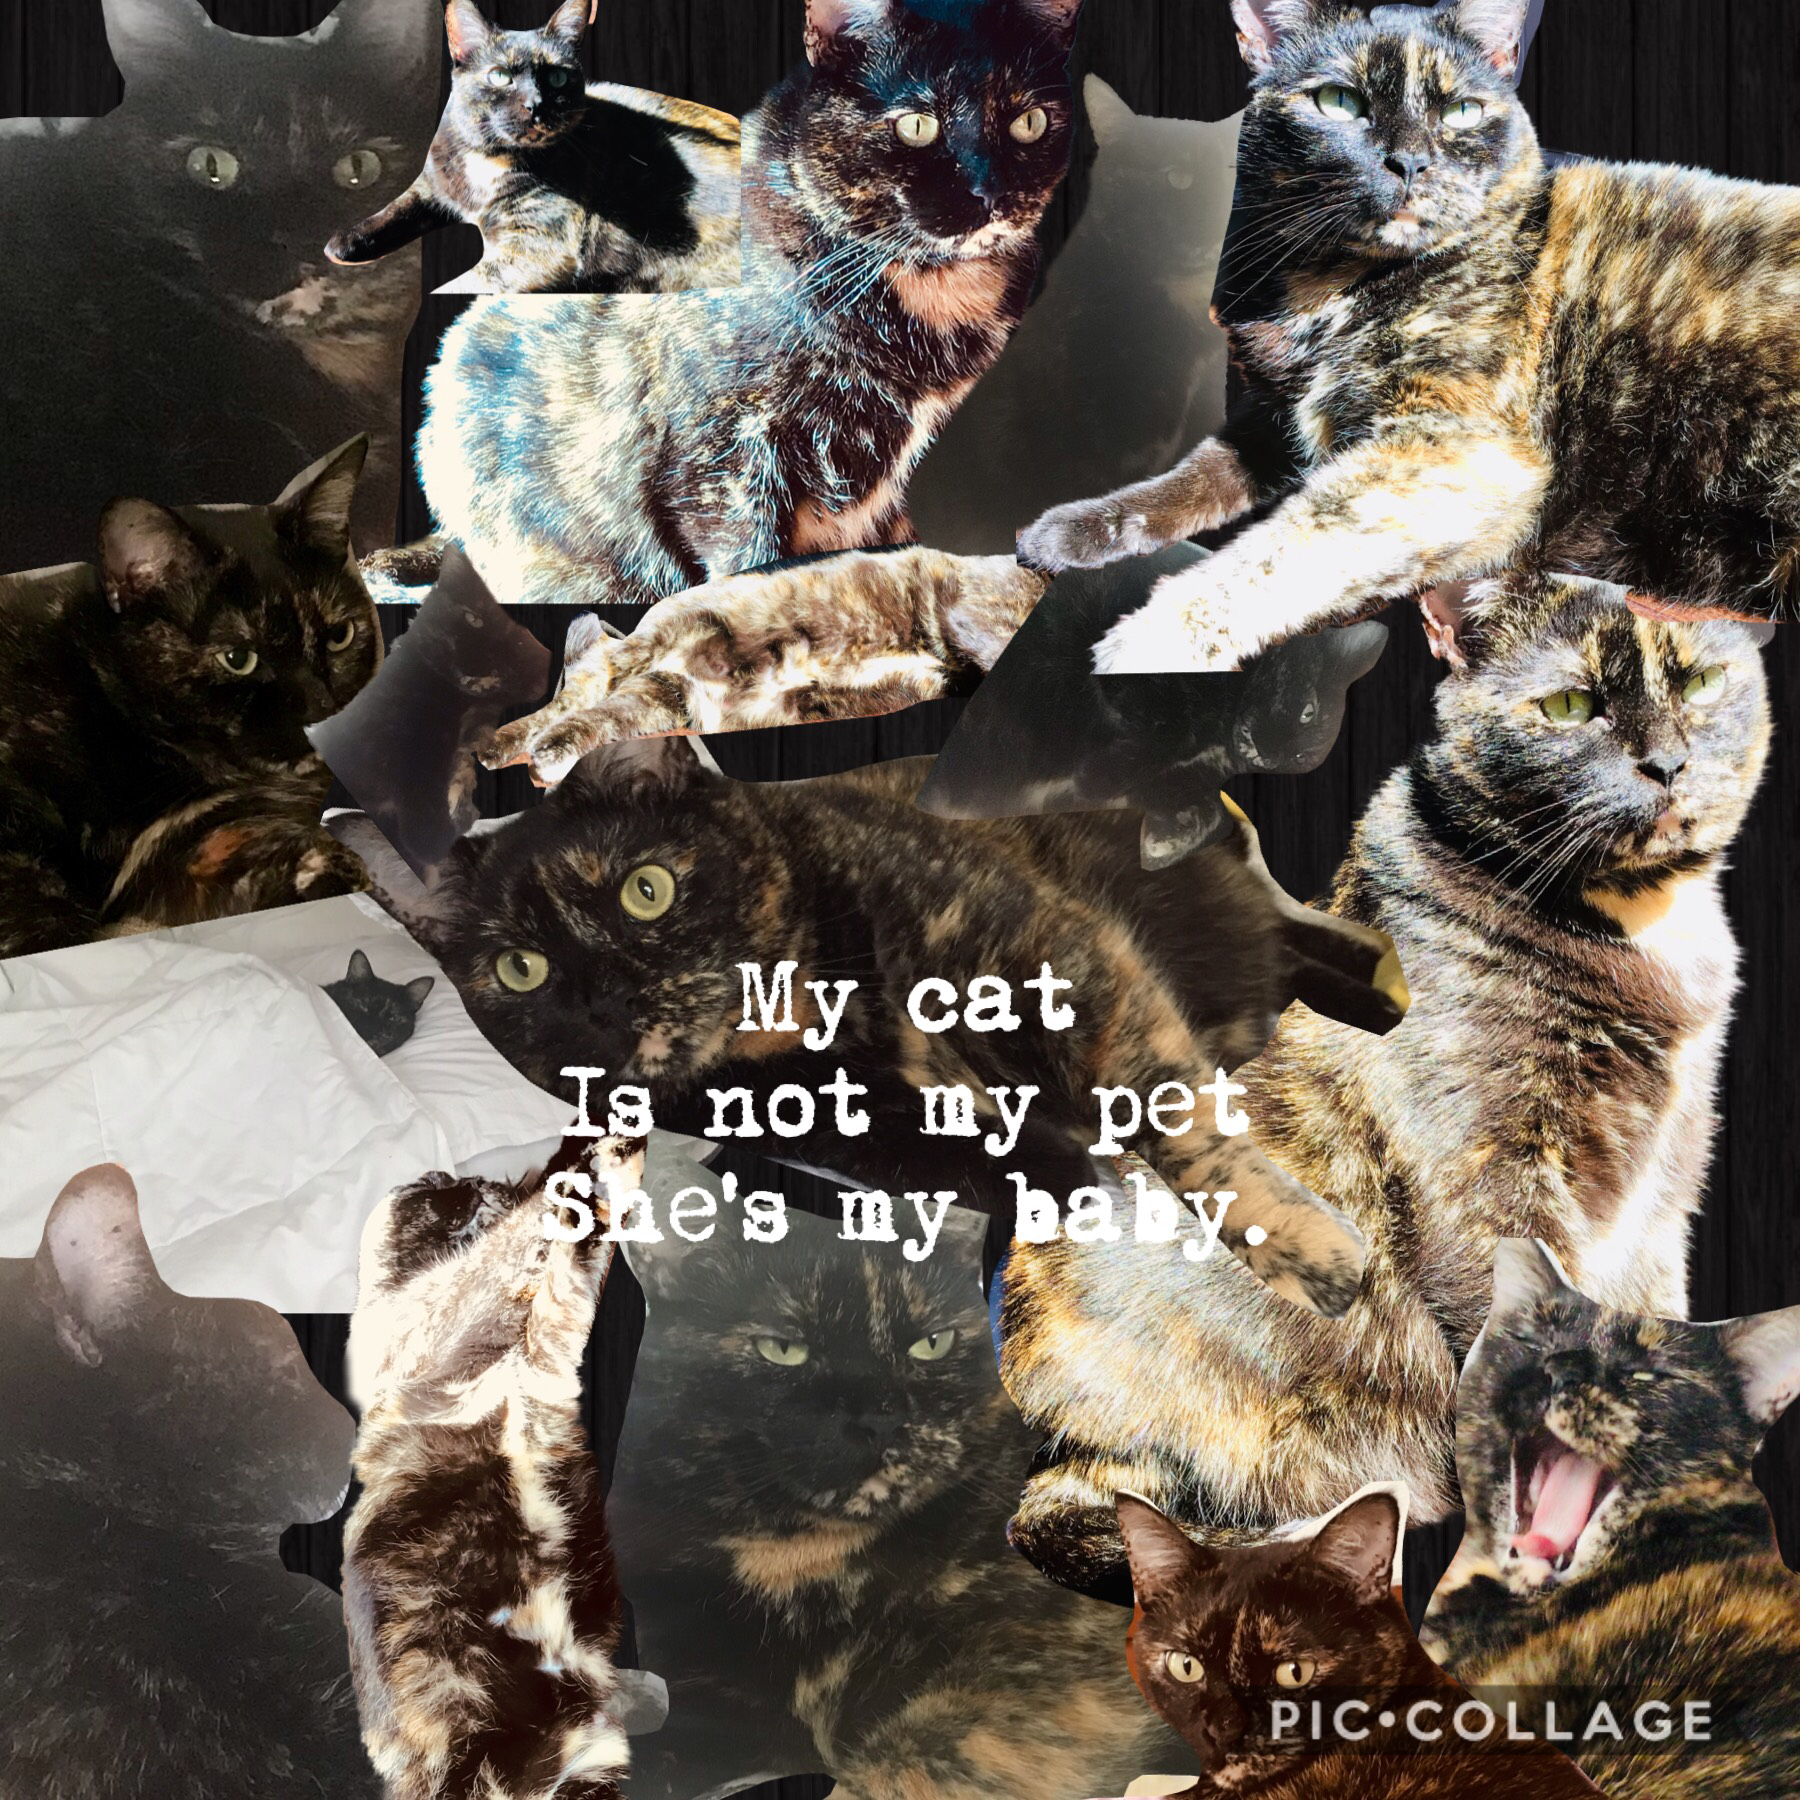 Another cat collage... as you can see i’m a cat lover